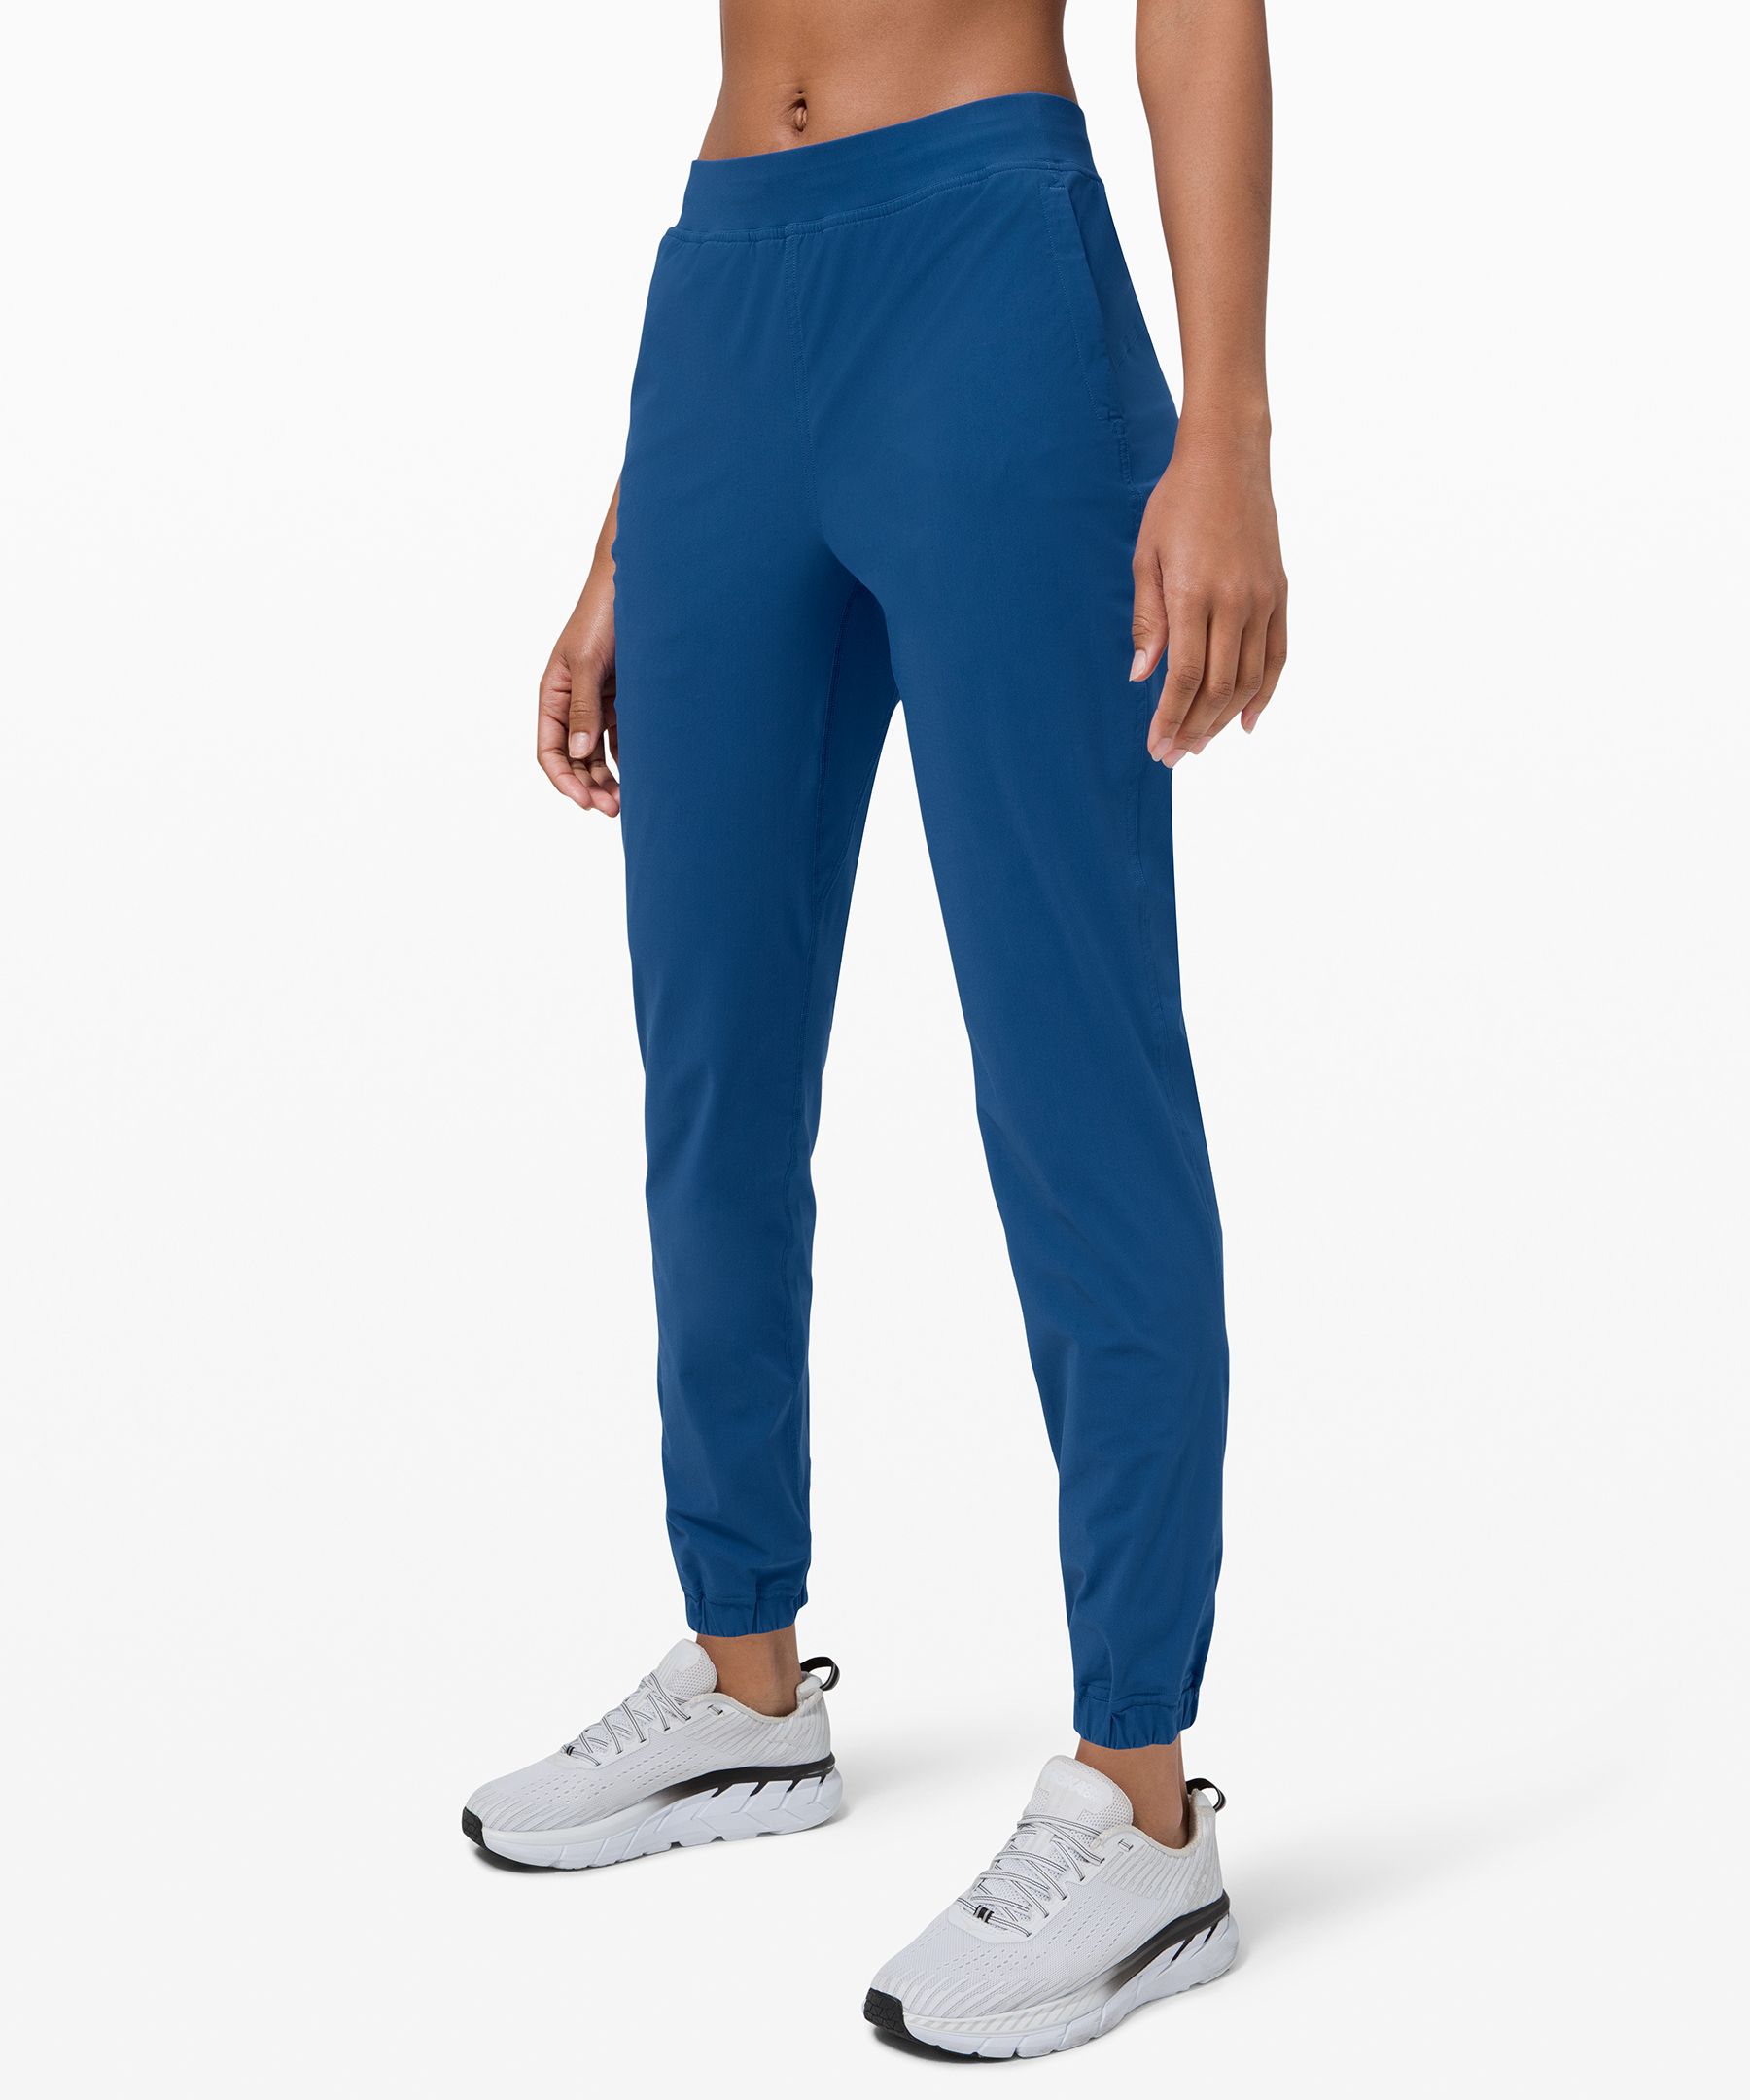 Adapted State HR Jogger (4) in Grey Sage is my perfect jogger! : r/lululemon